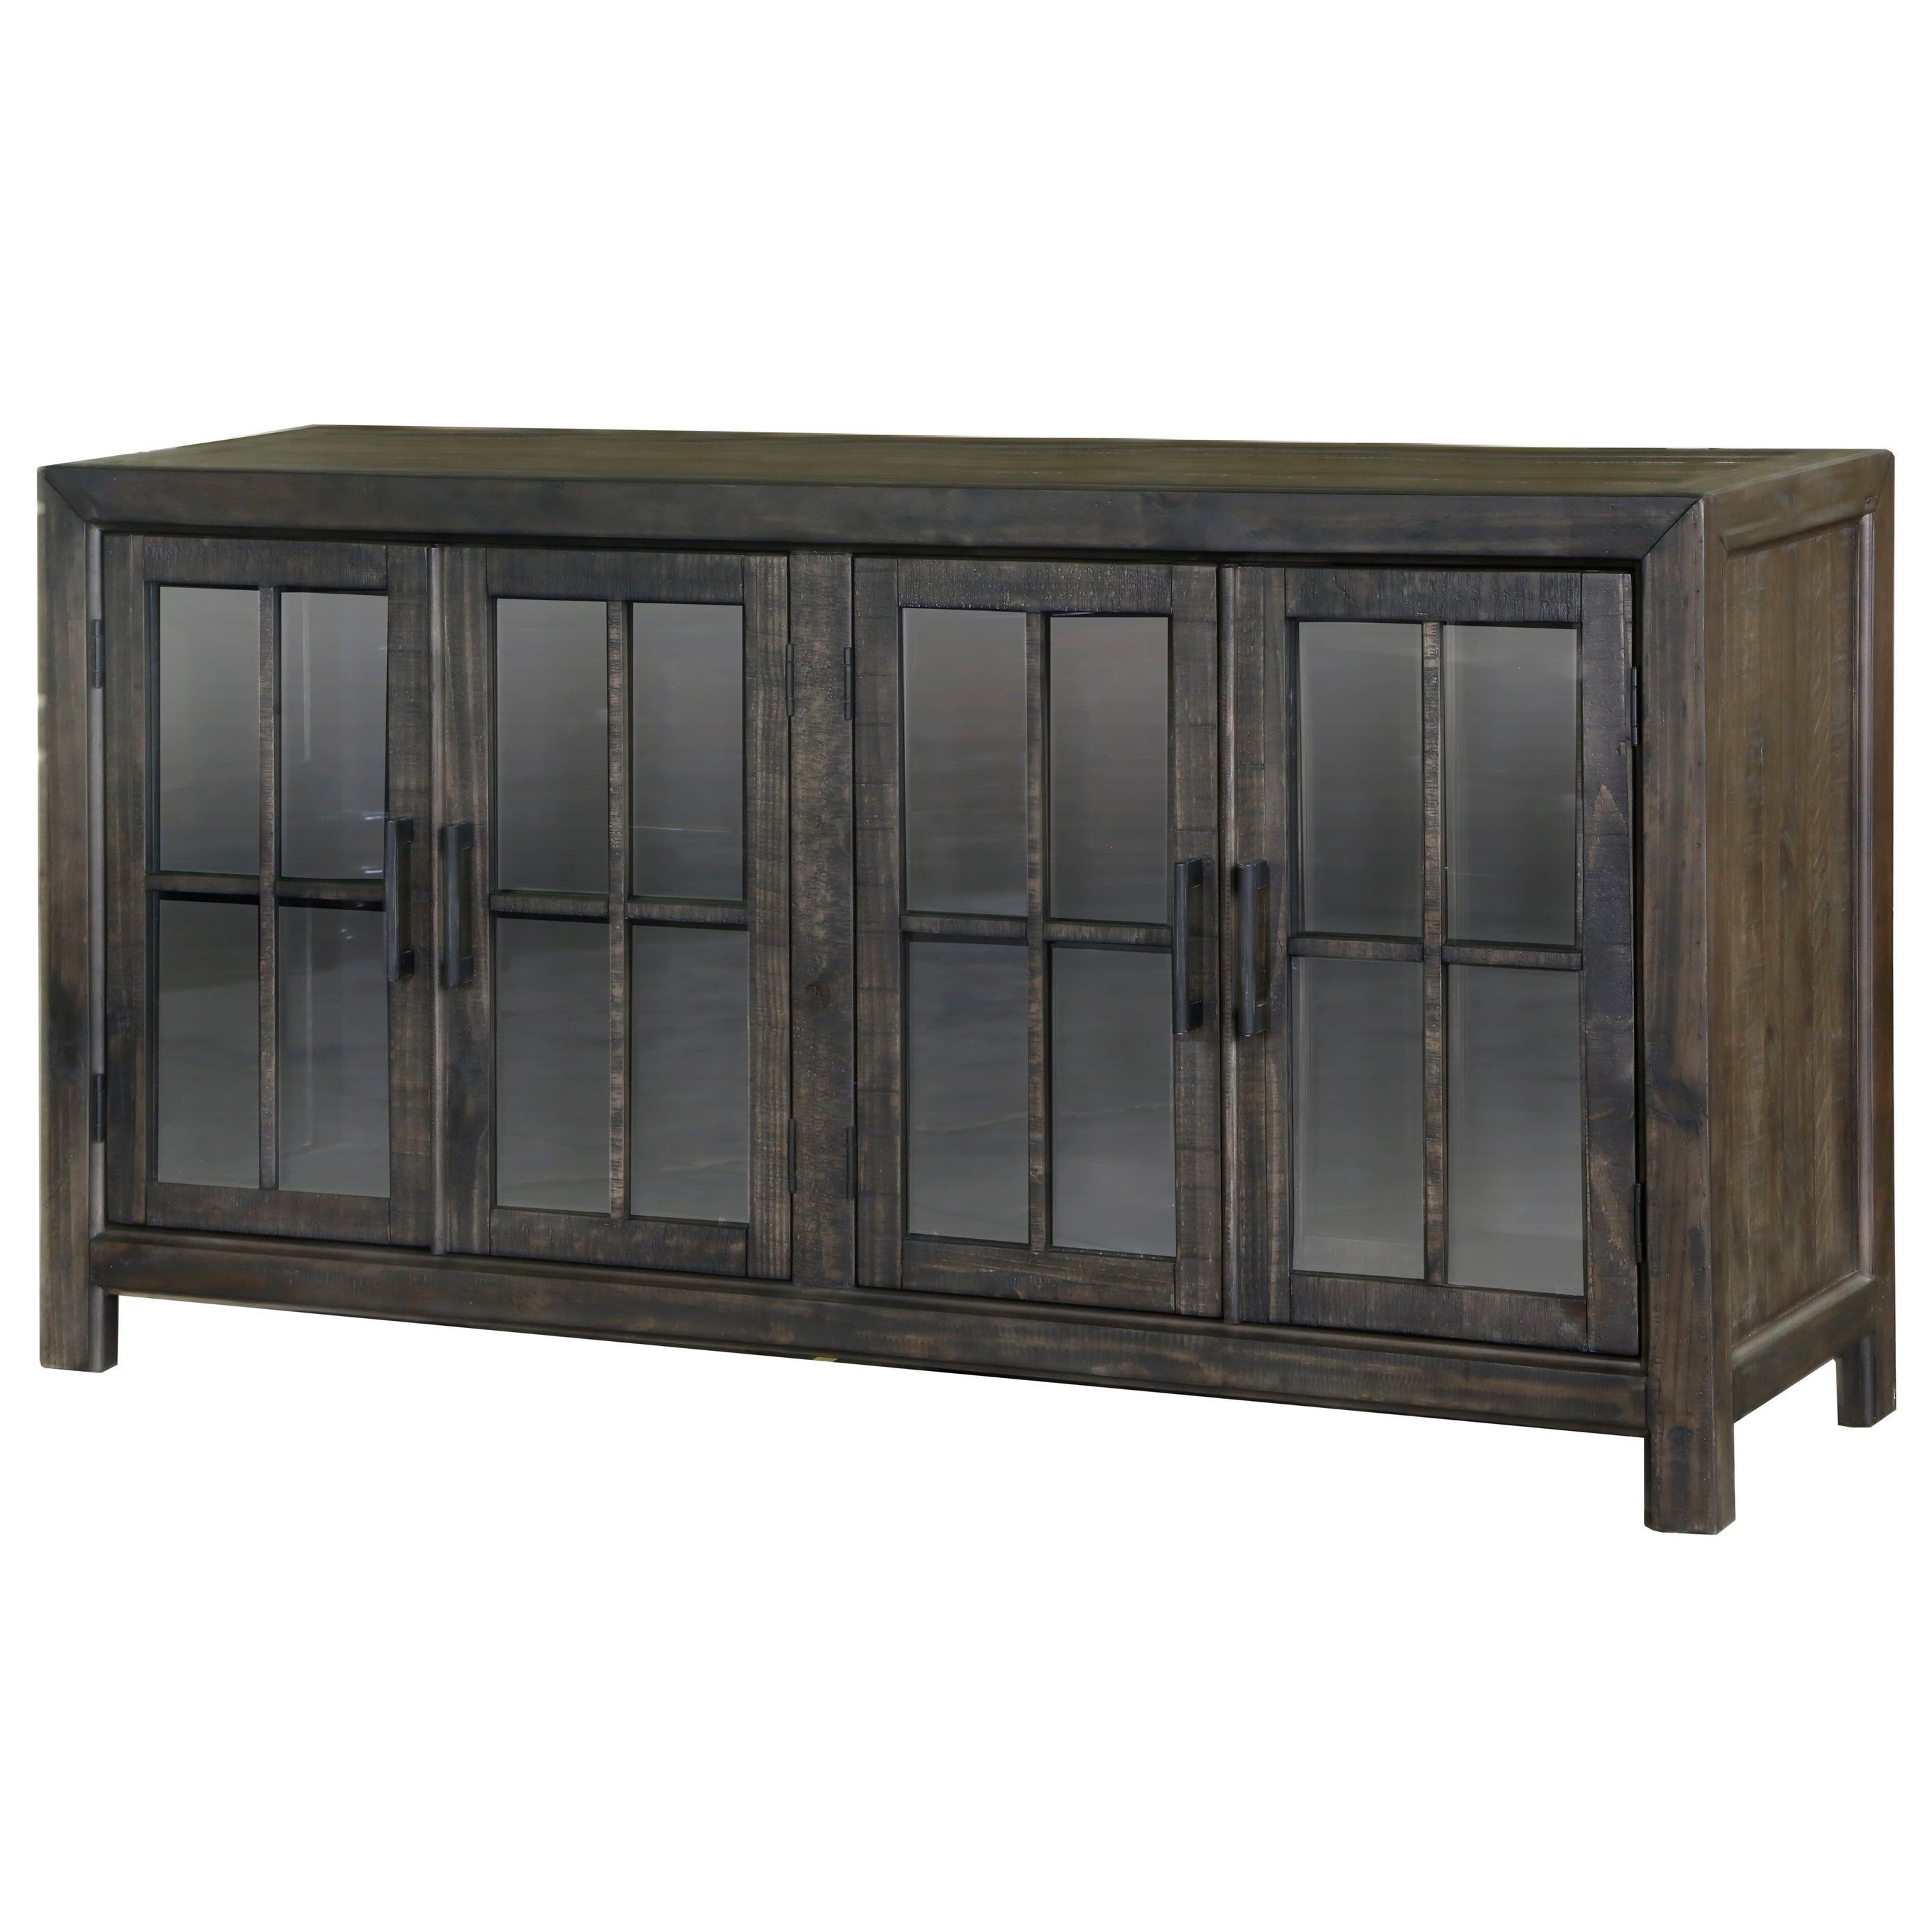 Bellamy Traditional Peppercorn Wood Buffet Curio Regarding Nadine Wood And Stainless Steel Buffets (View 11 of 30)